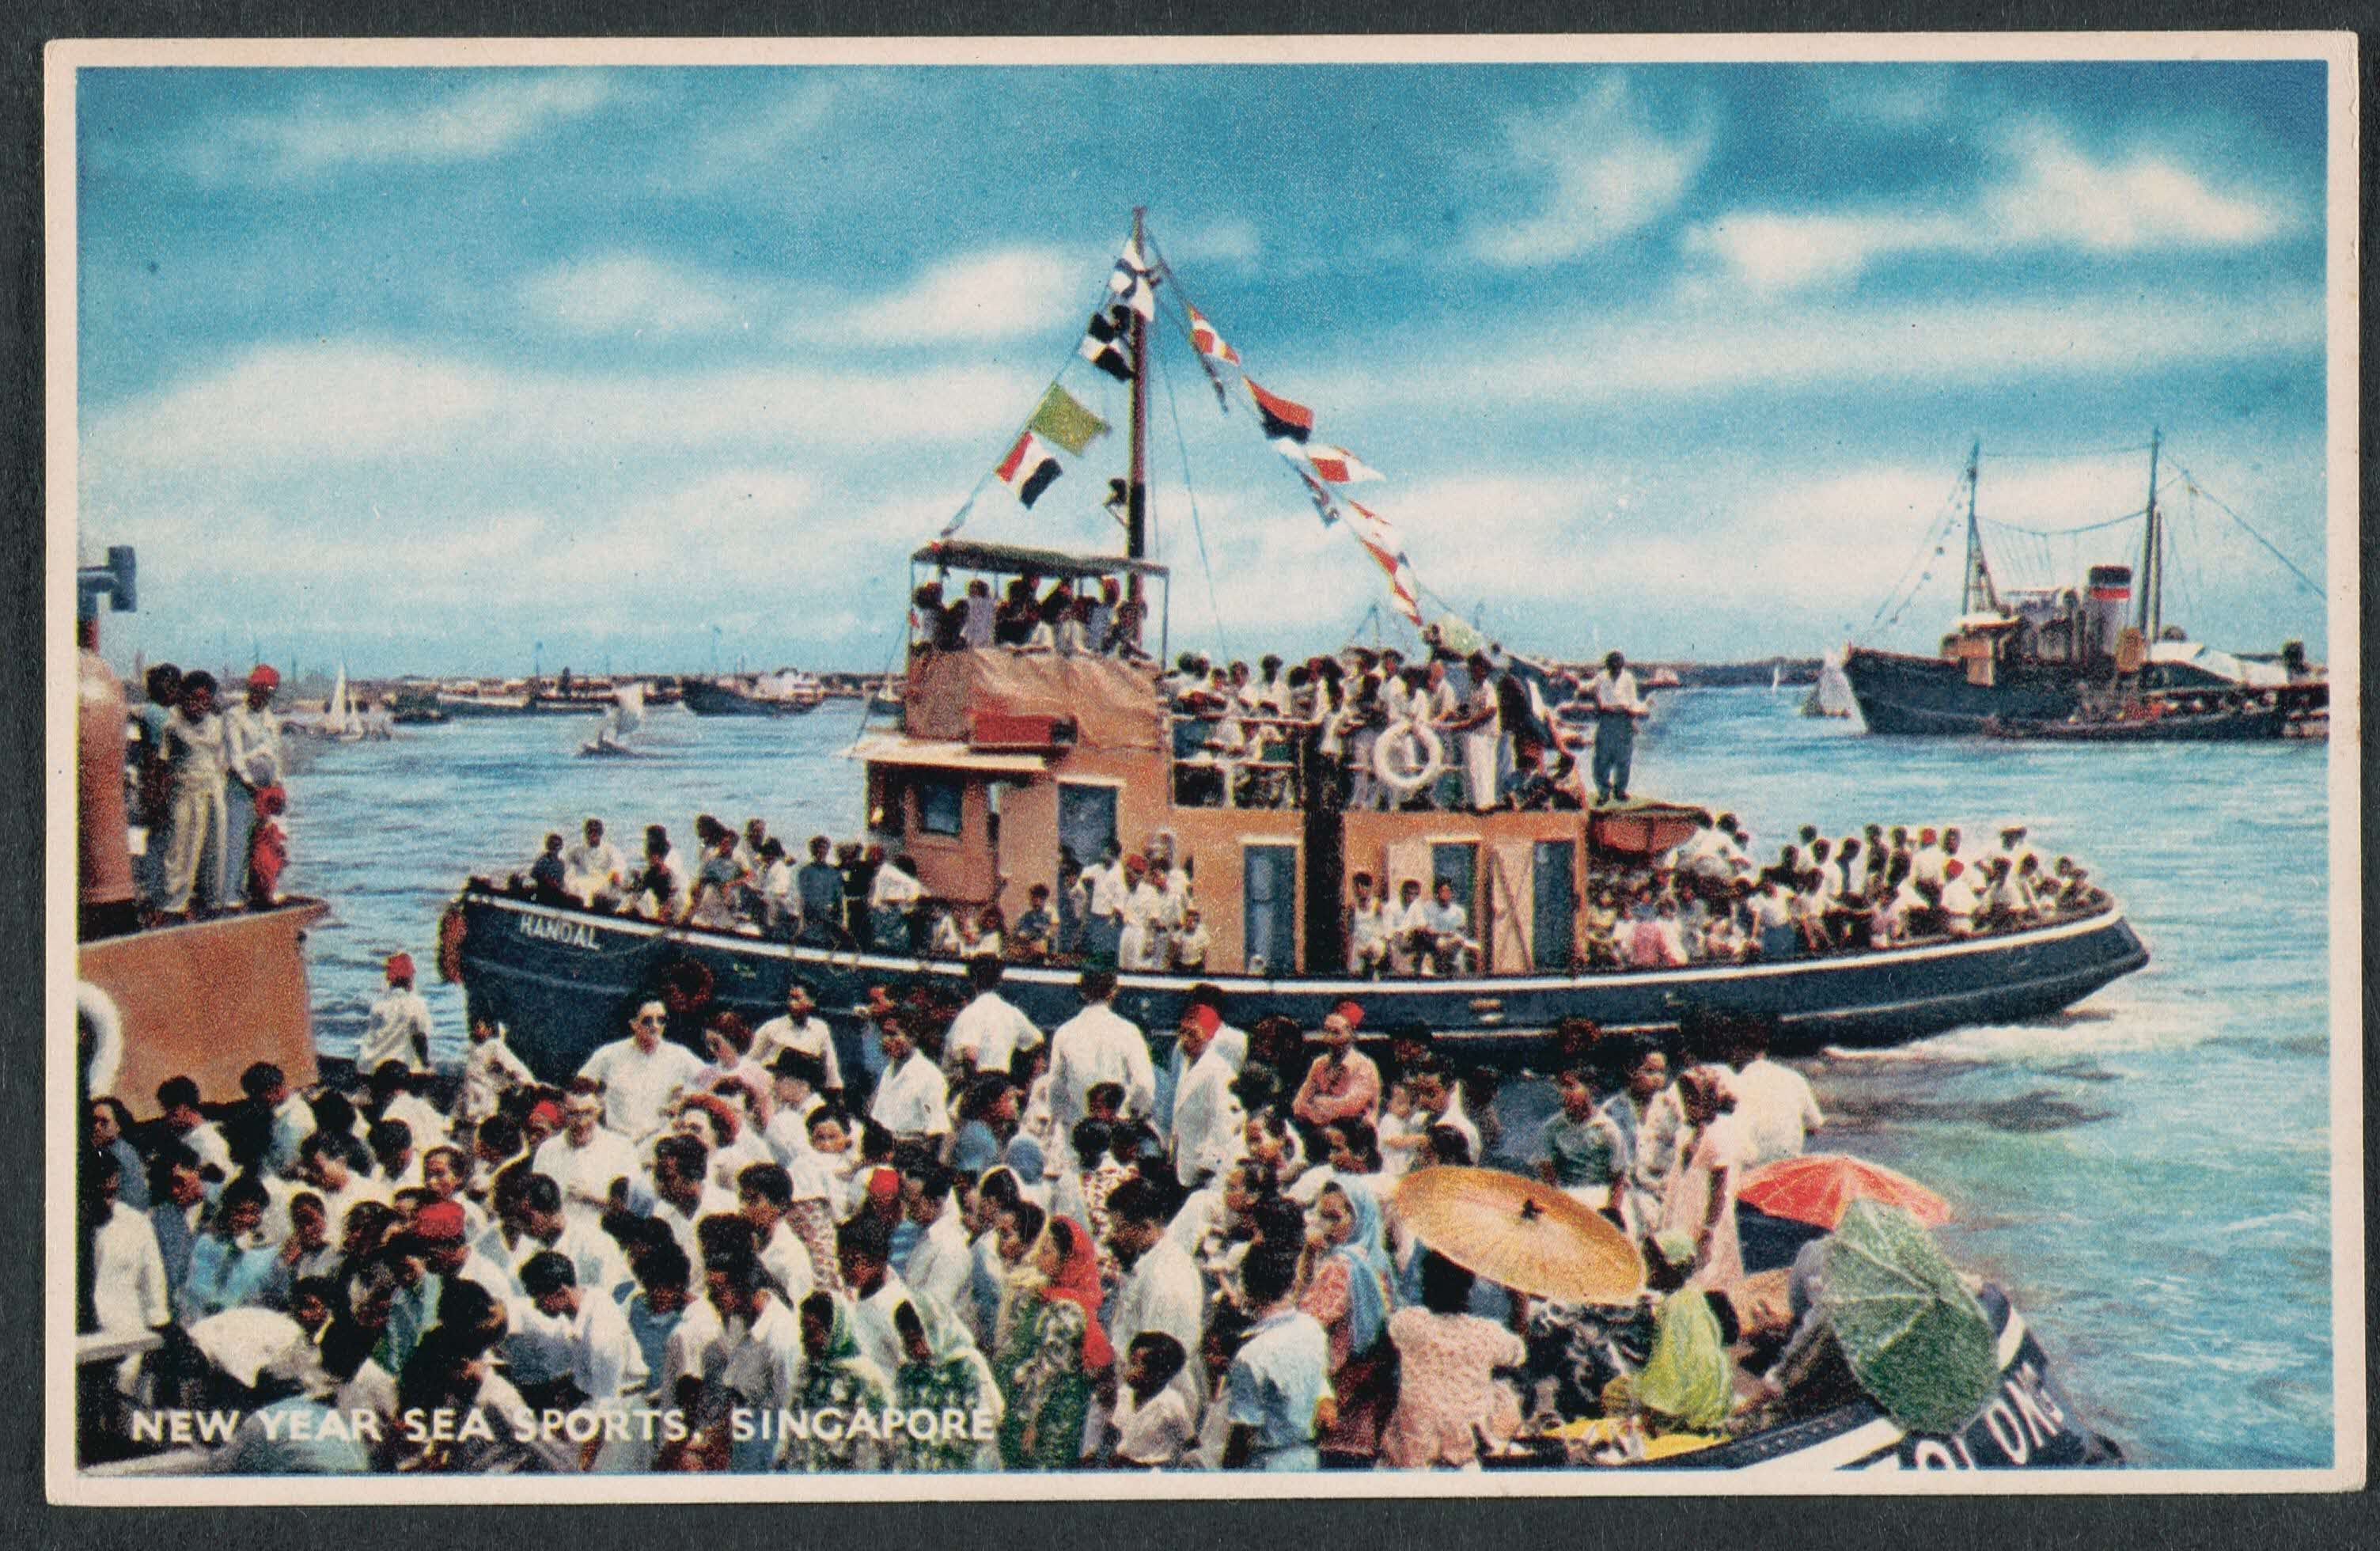 Passengers arrive in droves at the New Year Sea Sports, 1960s